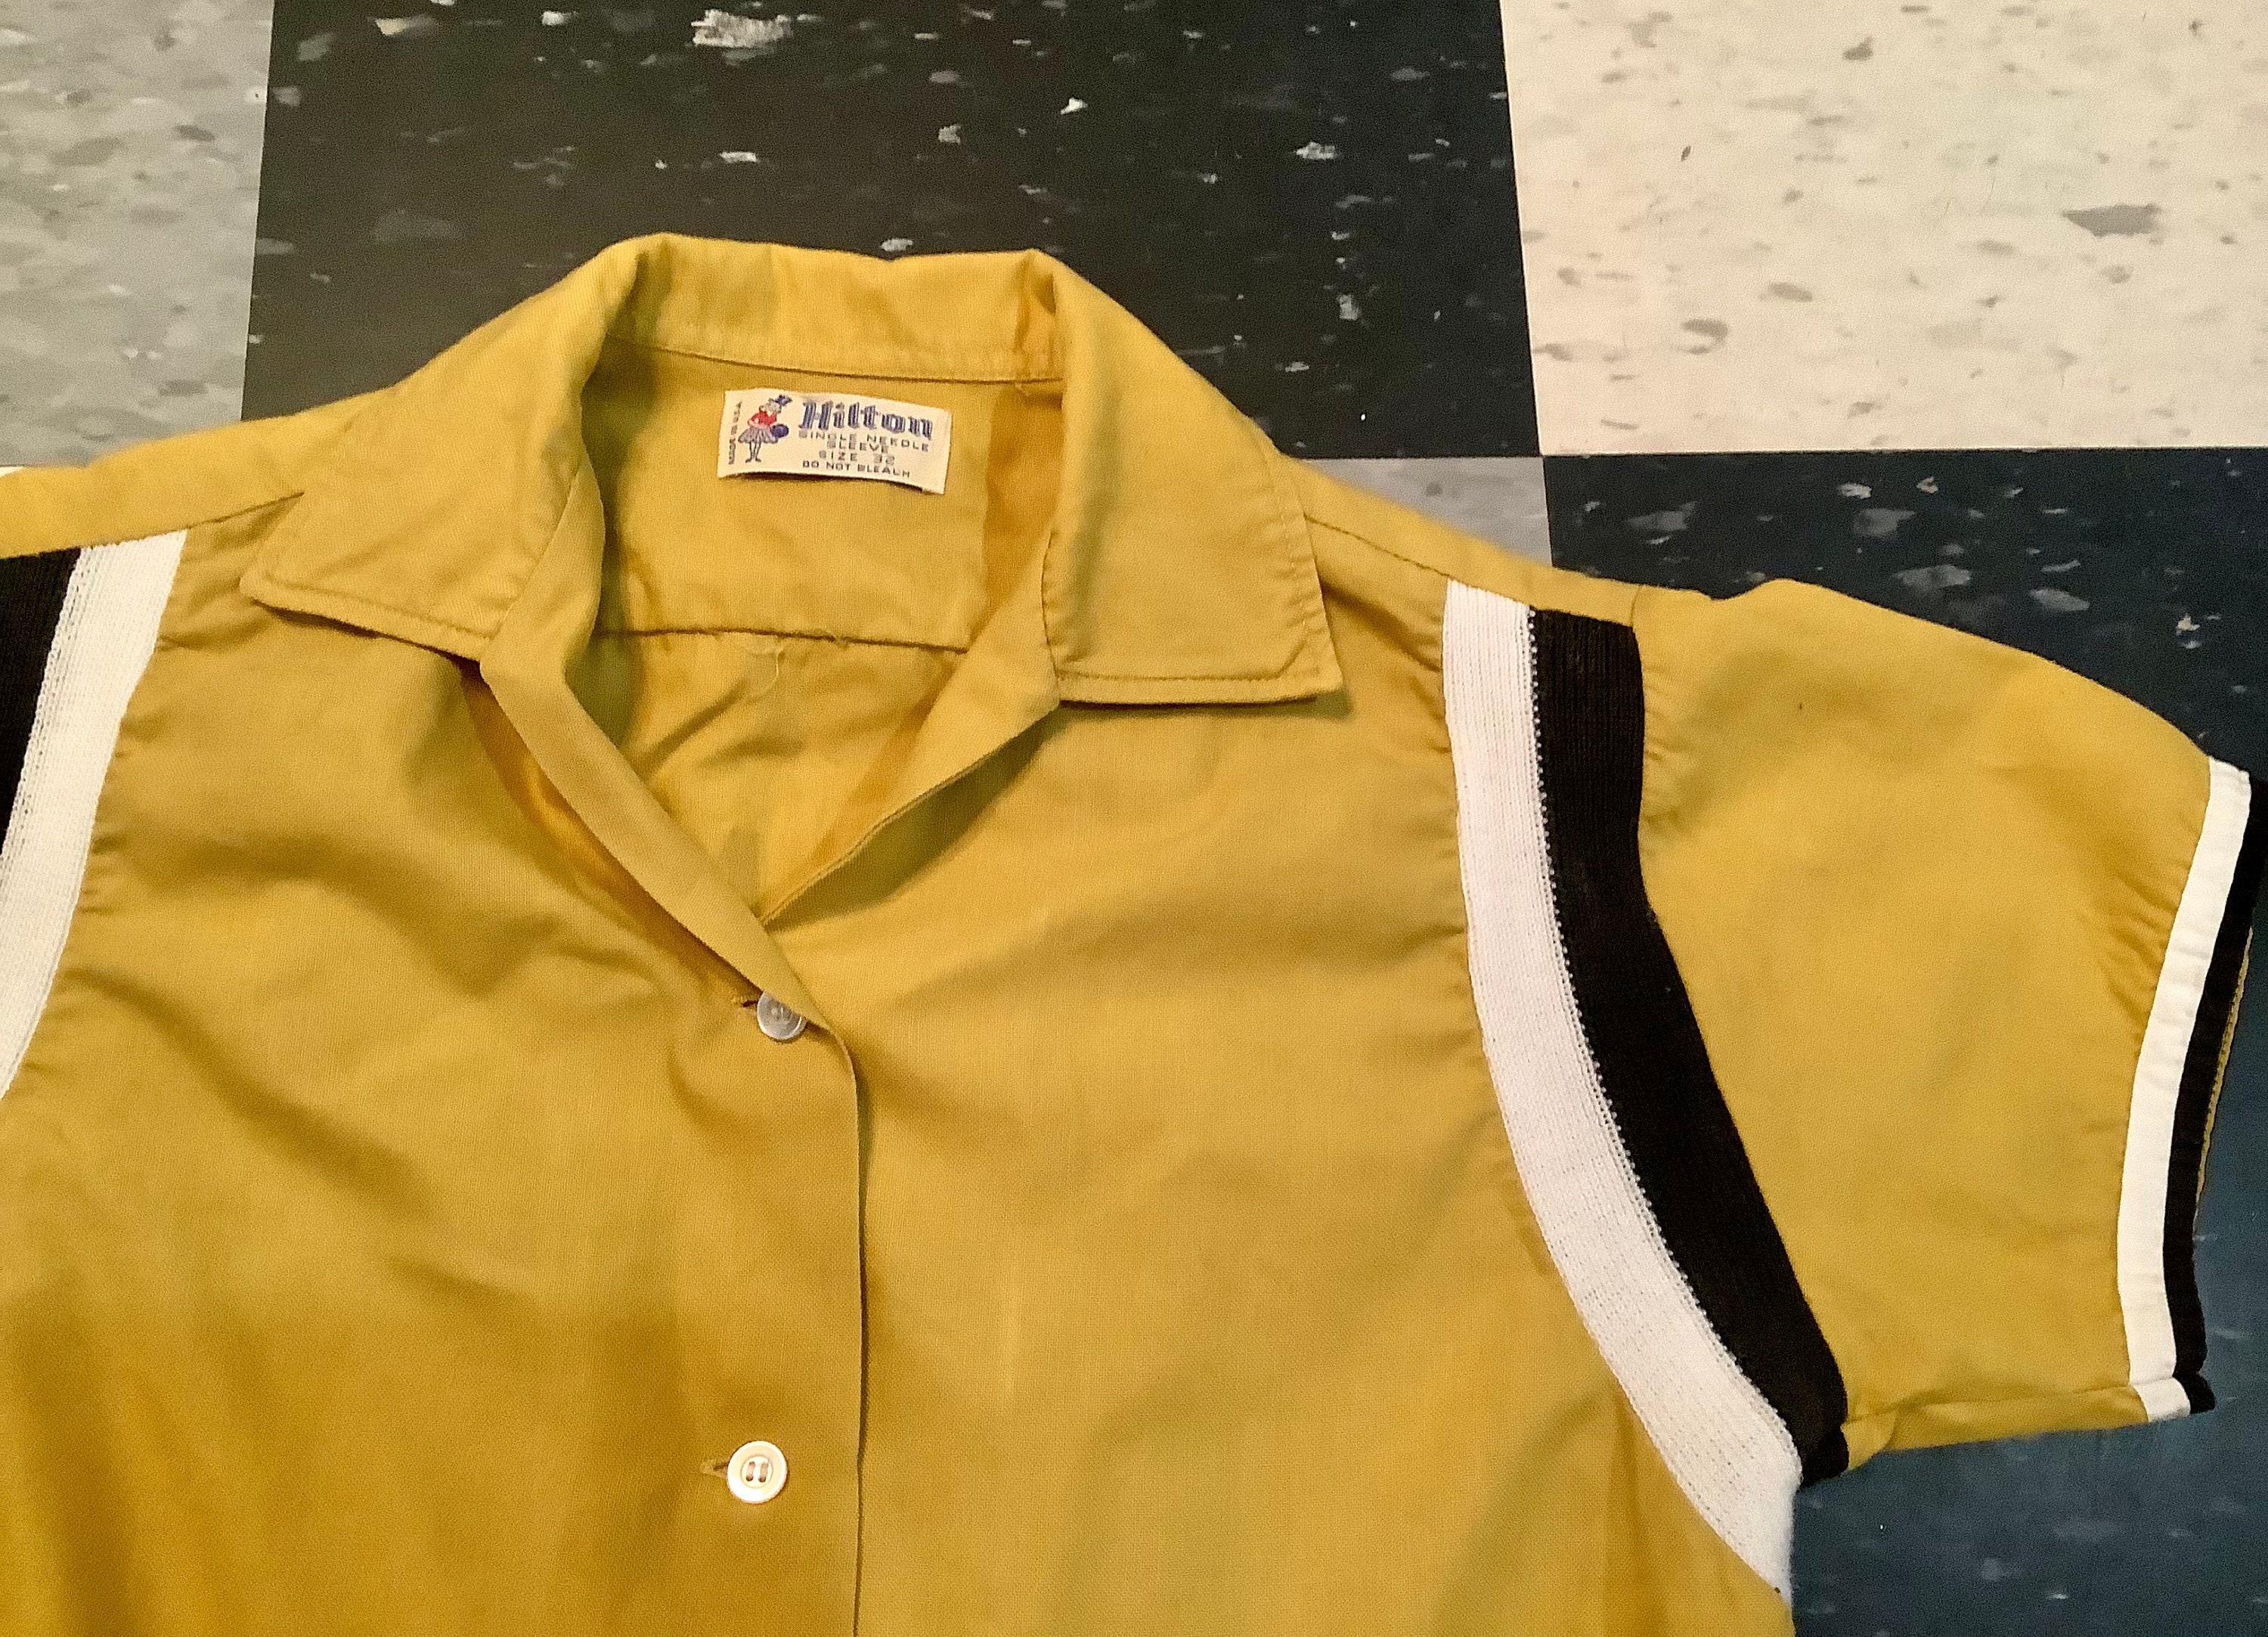 JeylaFashions Custom Made Hilton HP2243 Gold Yellow Bowling Shirt with Glitter or Vinyl Print Personalized Customized for Your Team.